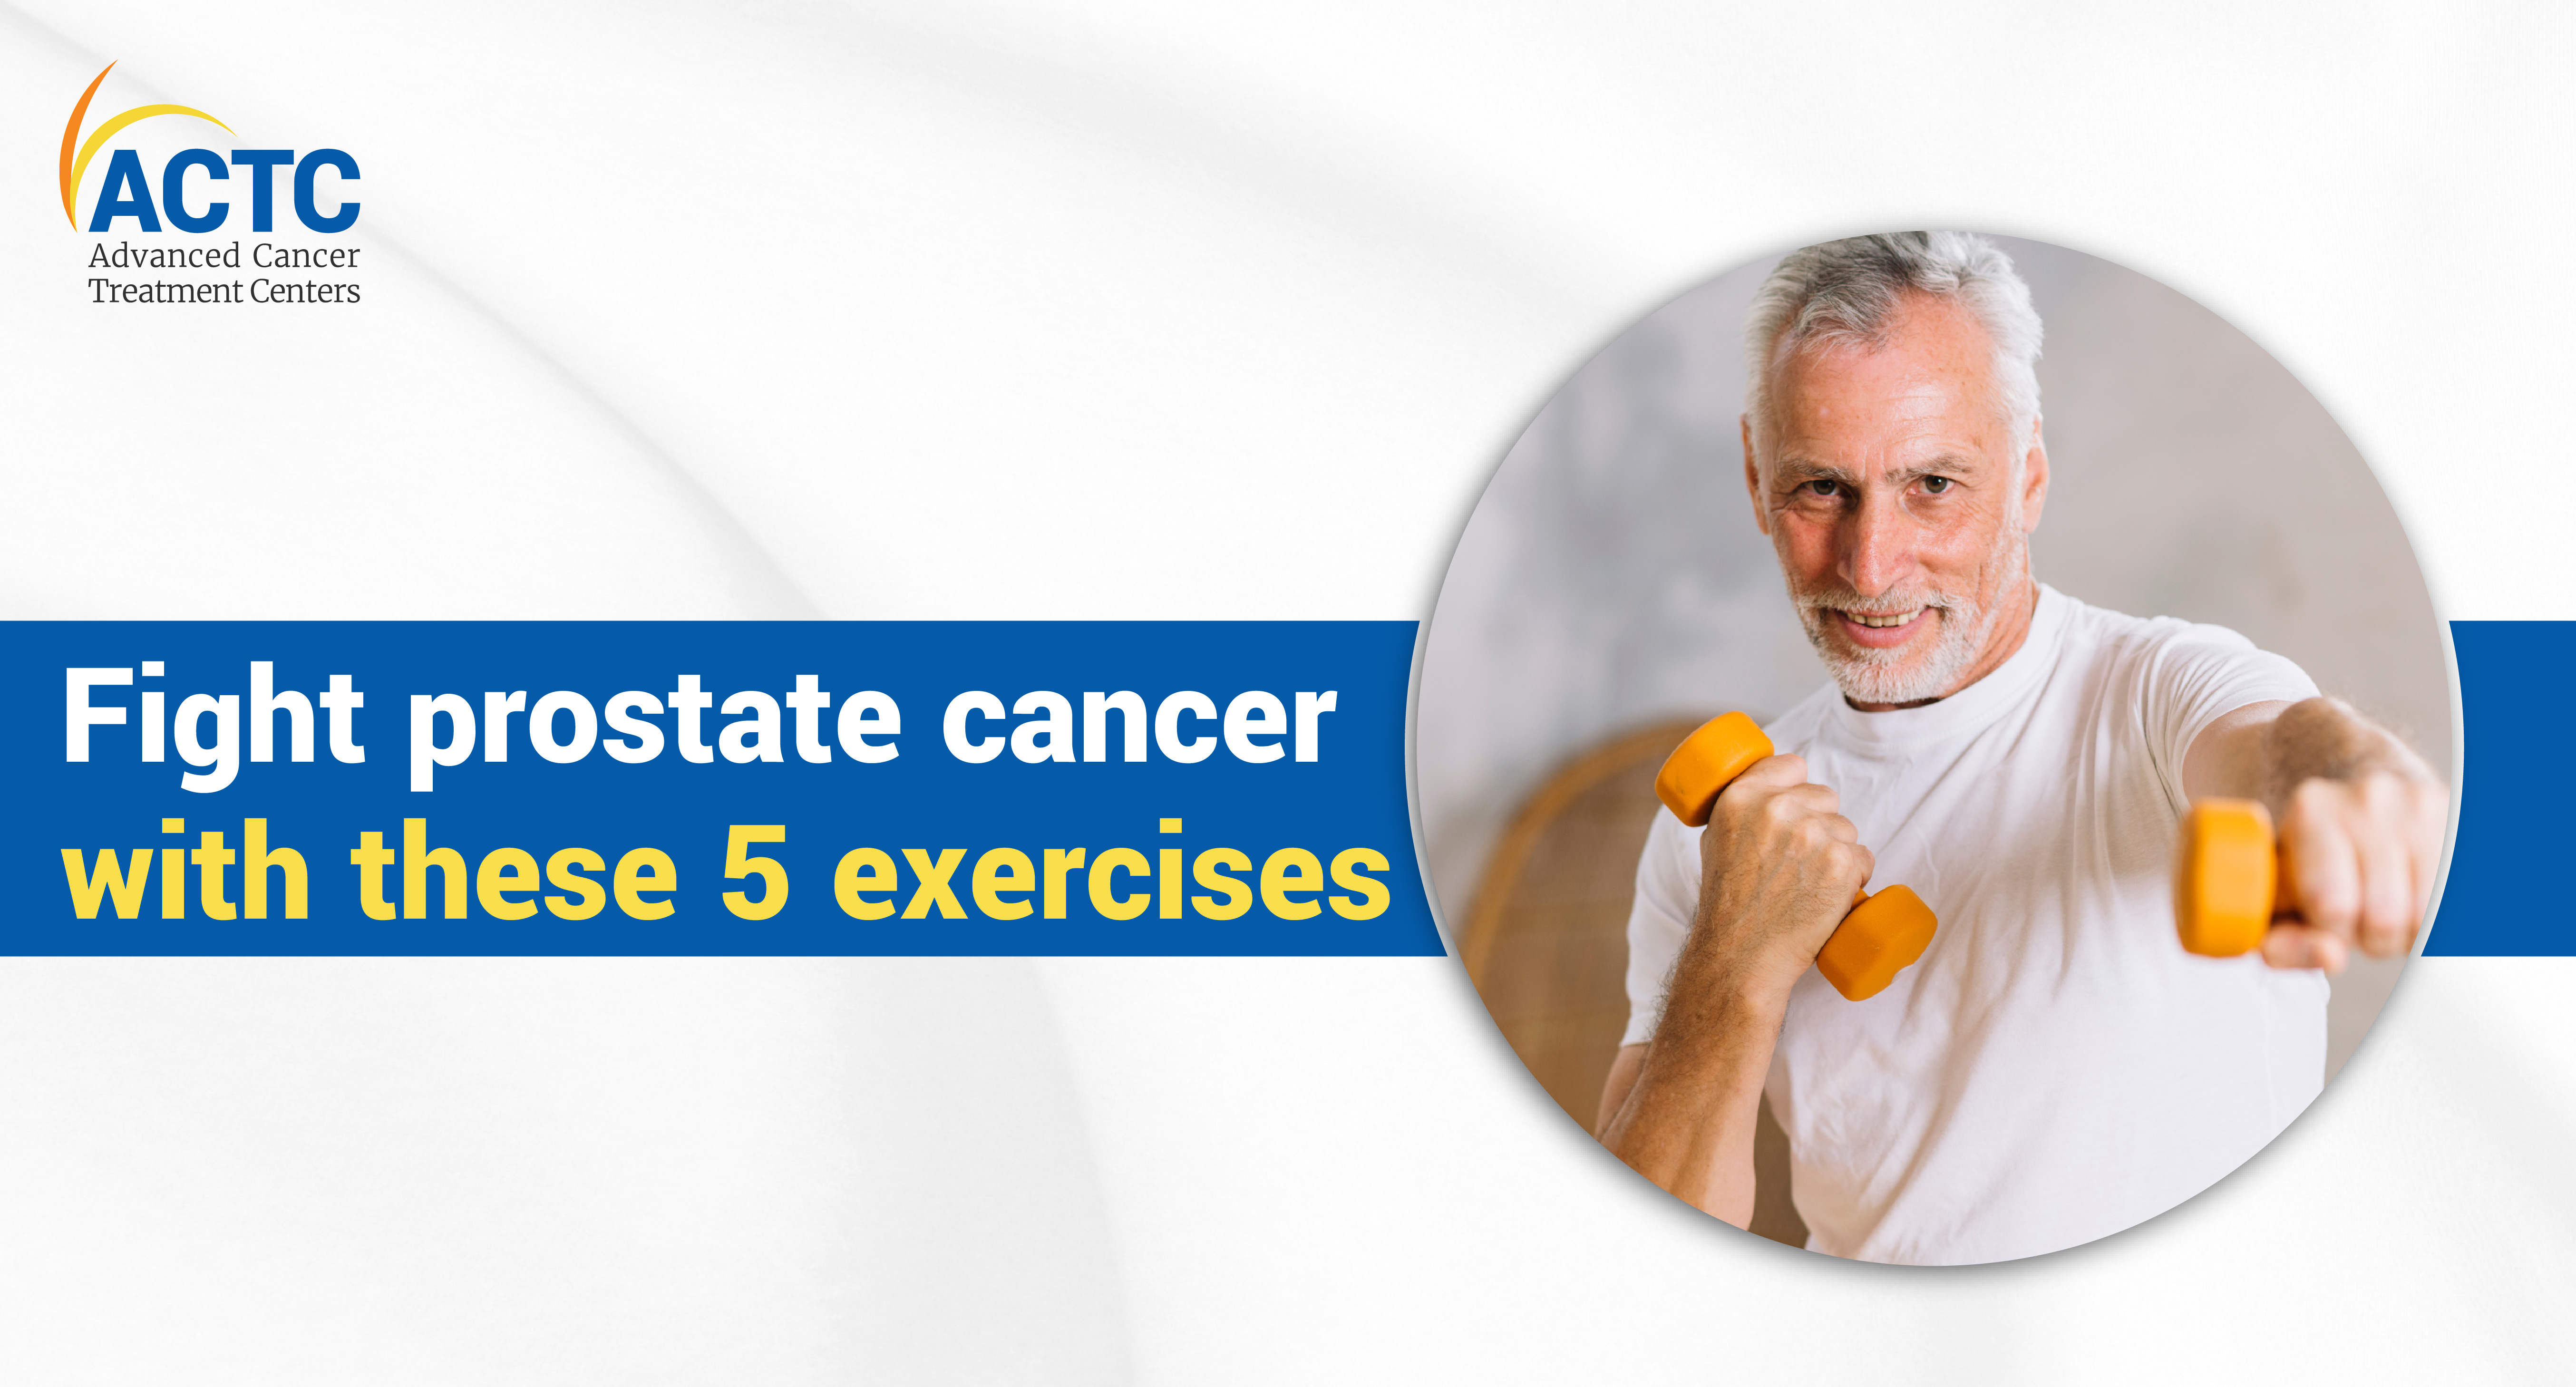 Fight prostate cancer with these 6 exercises